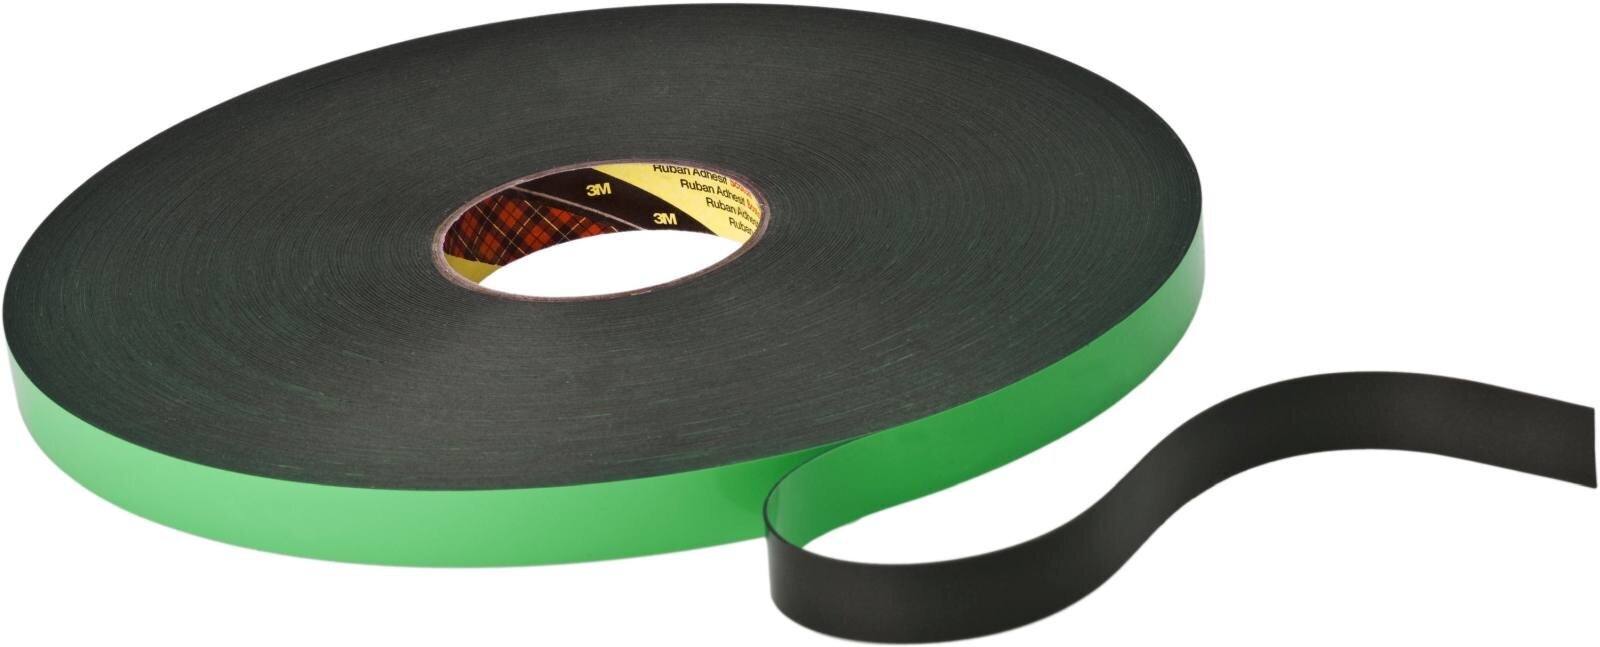 3M Double-sided PE foam tape with acrylic adhesive 9508B, black, 9 mm x 66 m, 0.8 mm